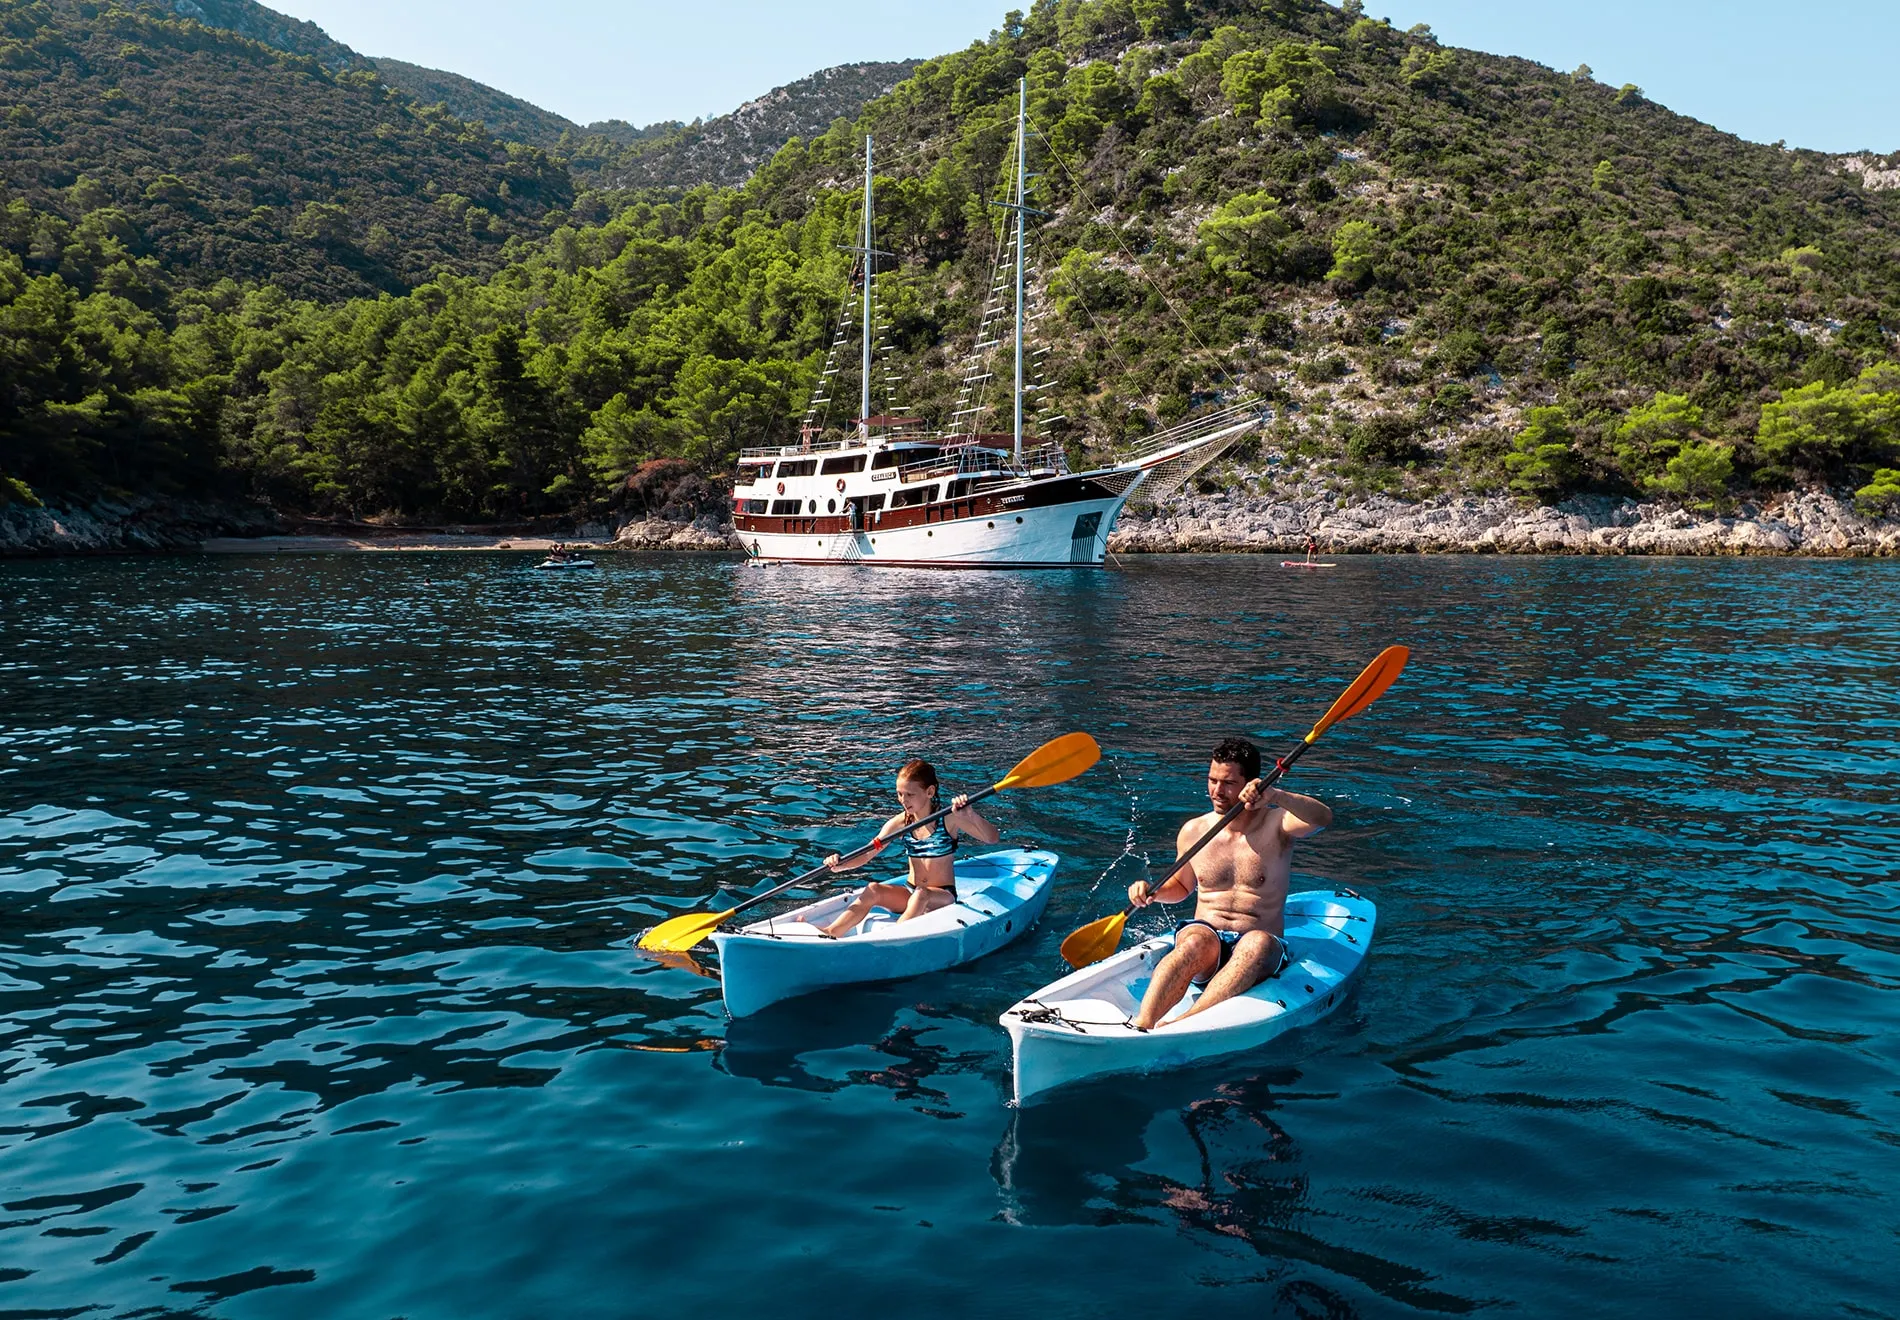 Which sailing routes in Croatia do you recommend and why